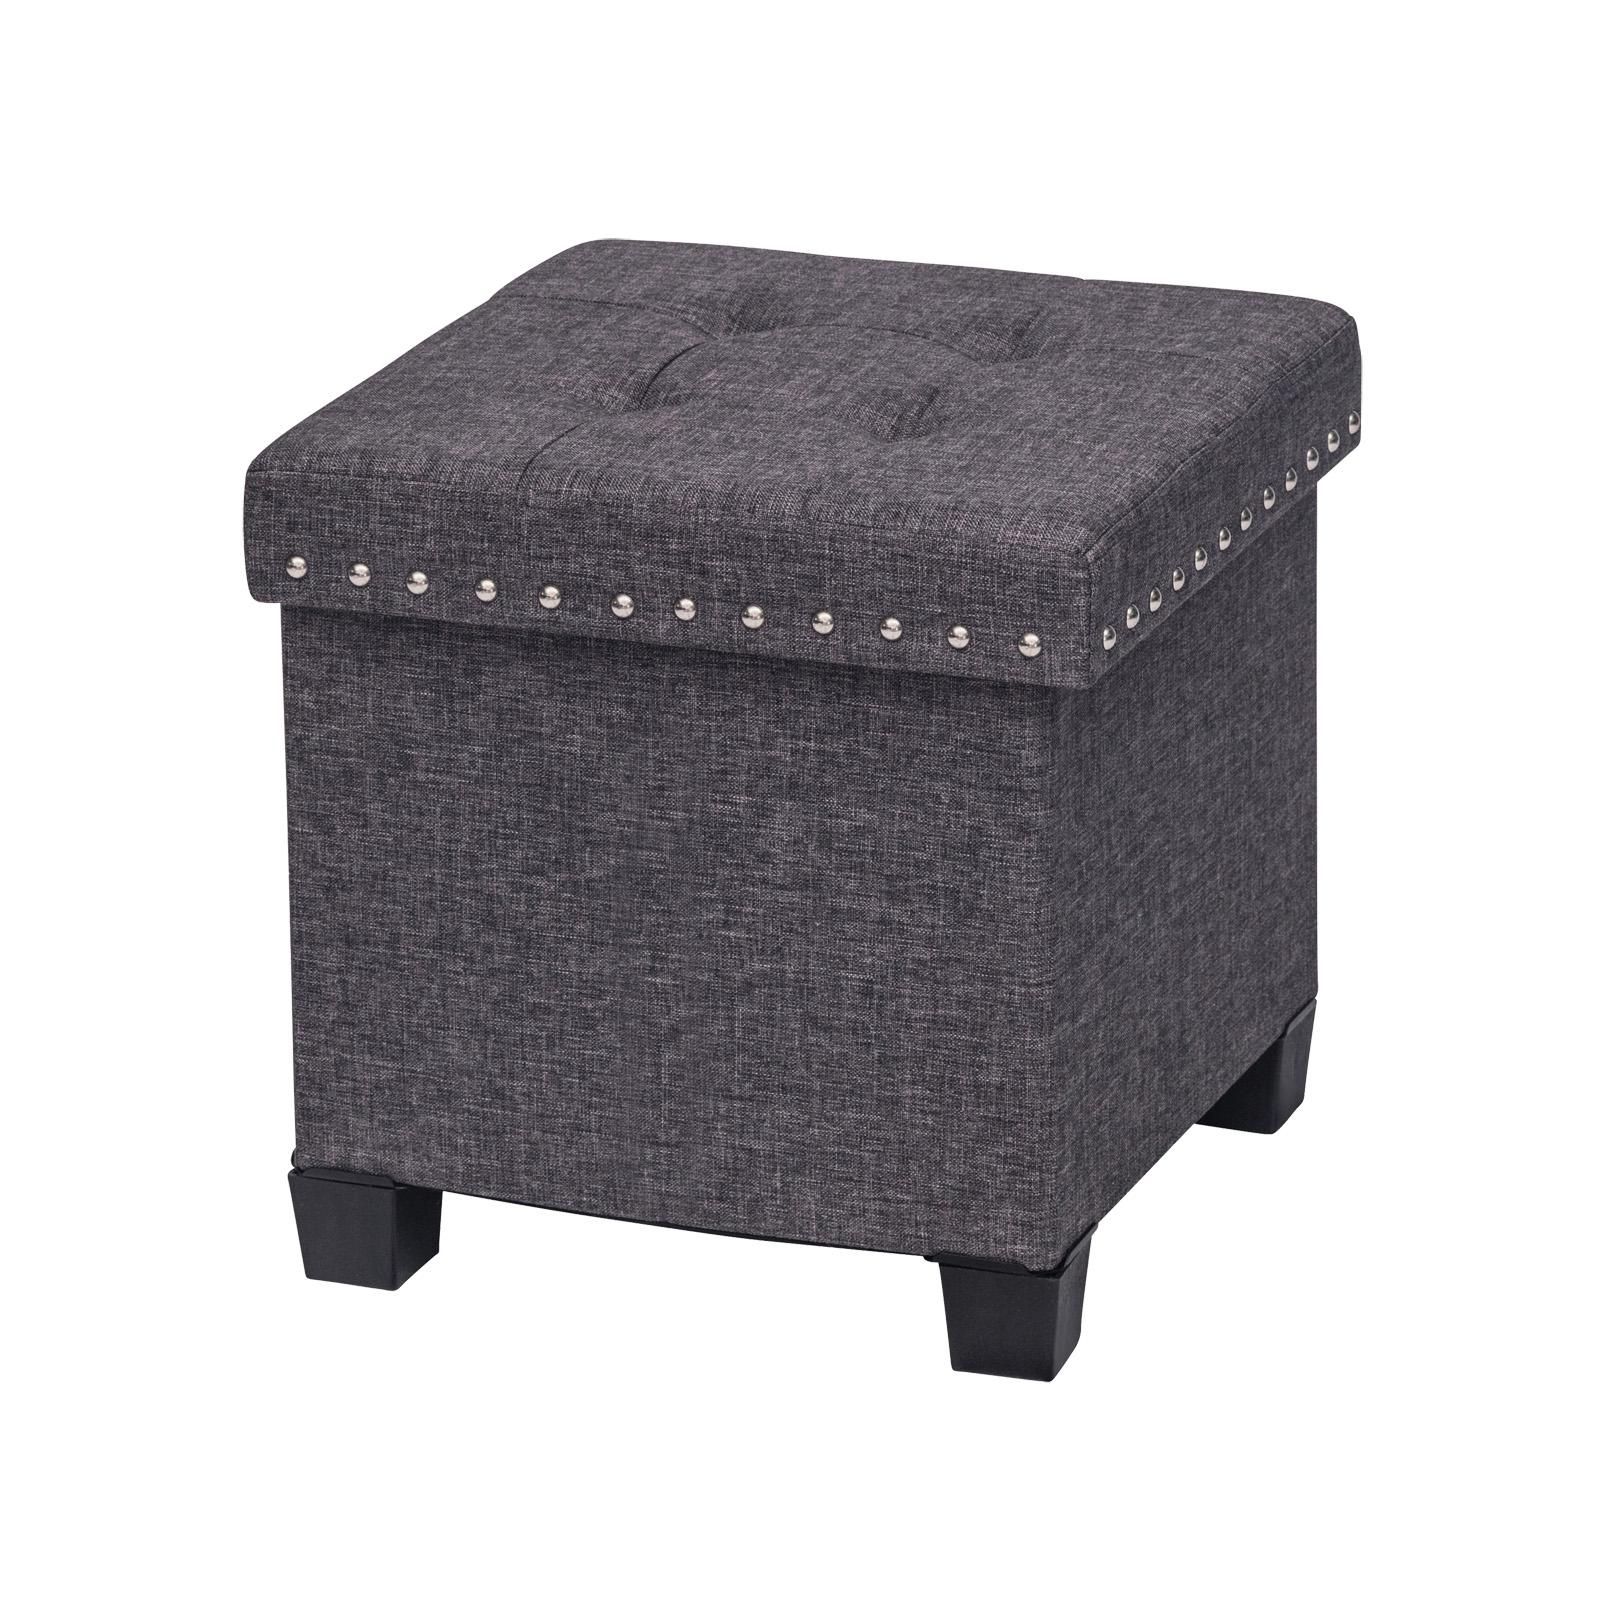 Nathan James Payton Foldable Cube Storage Ottoman Footrest And Seat With Well Known Solid Cuboid Pouf Ottomans (View 9 of 10)